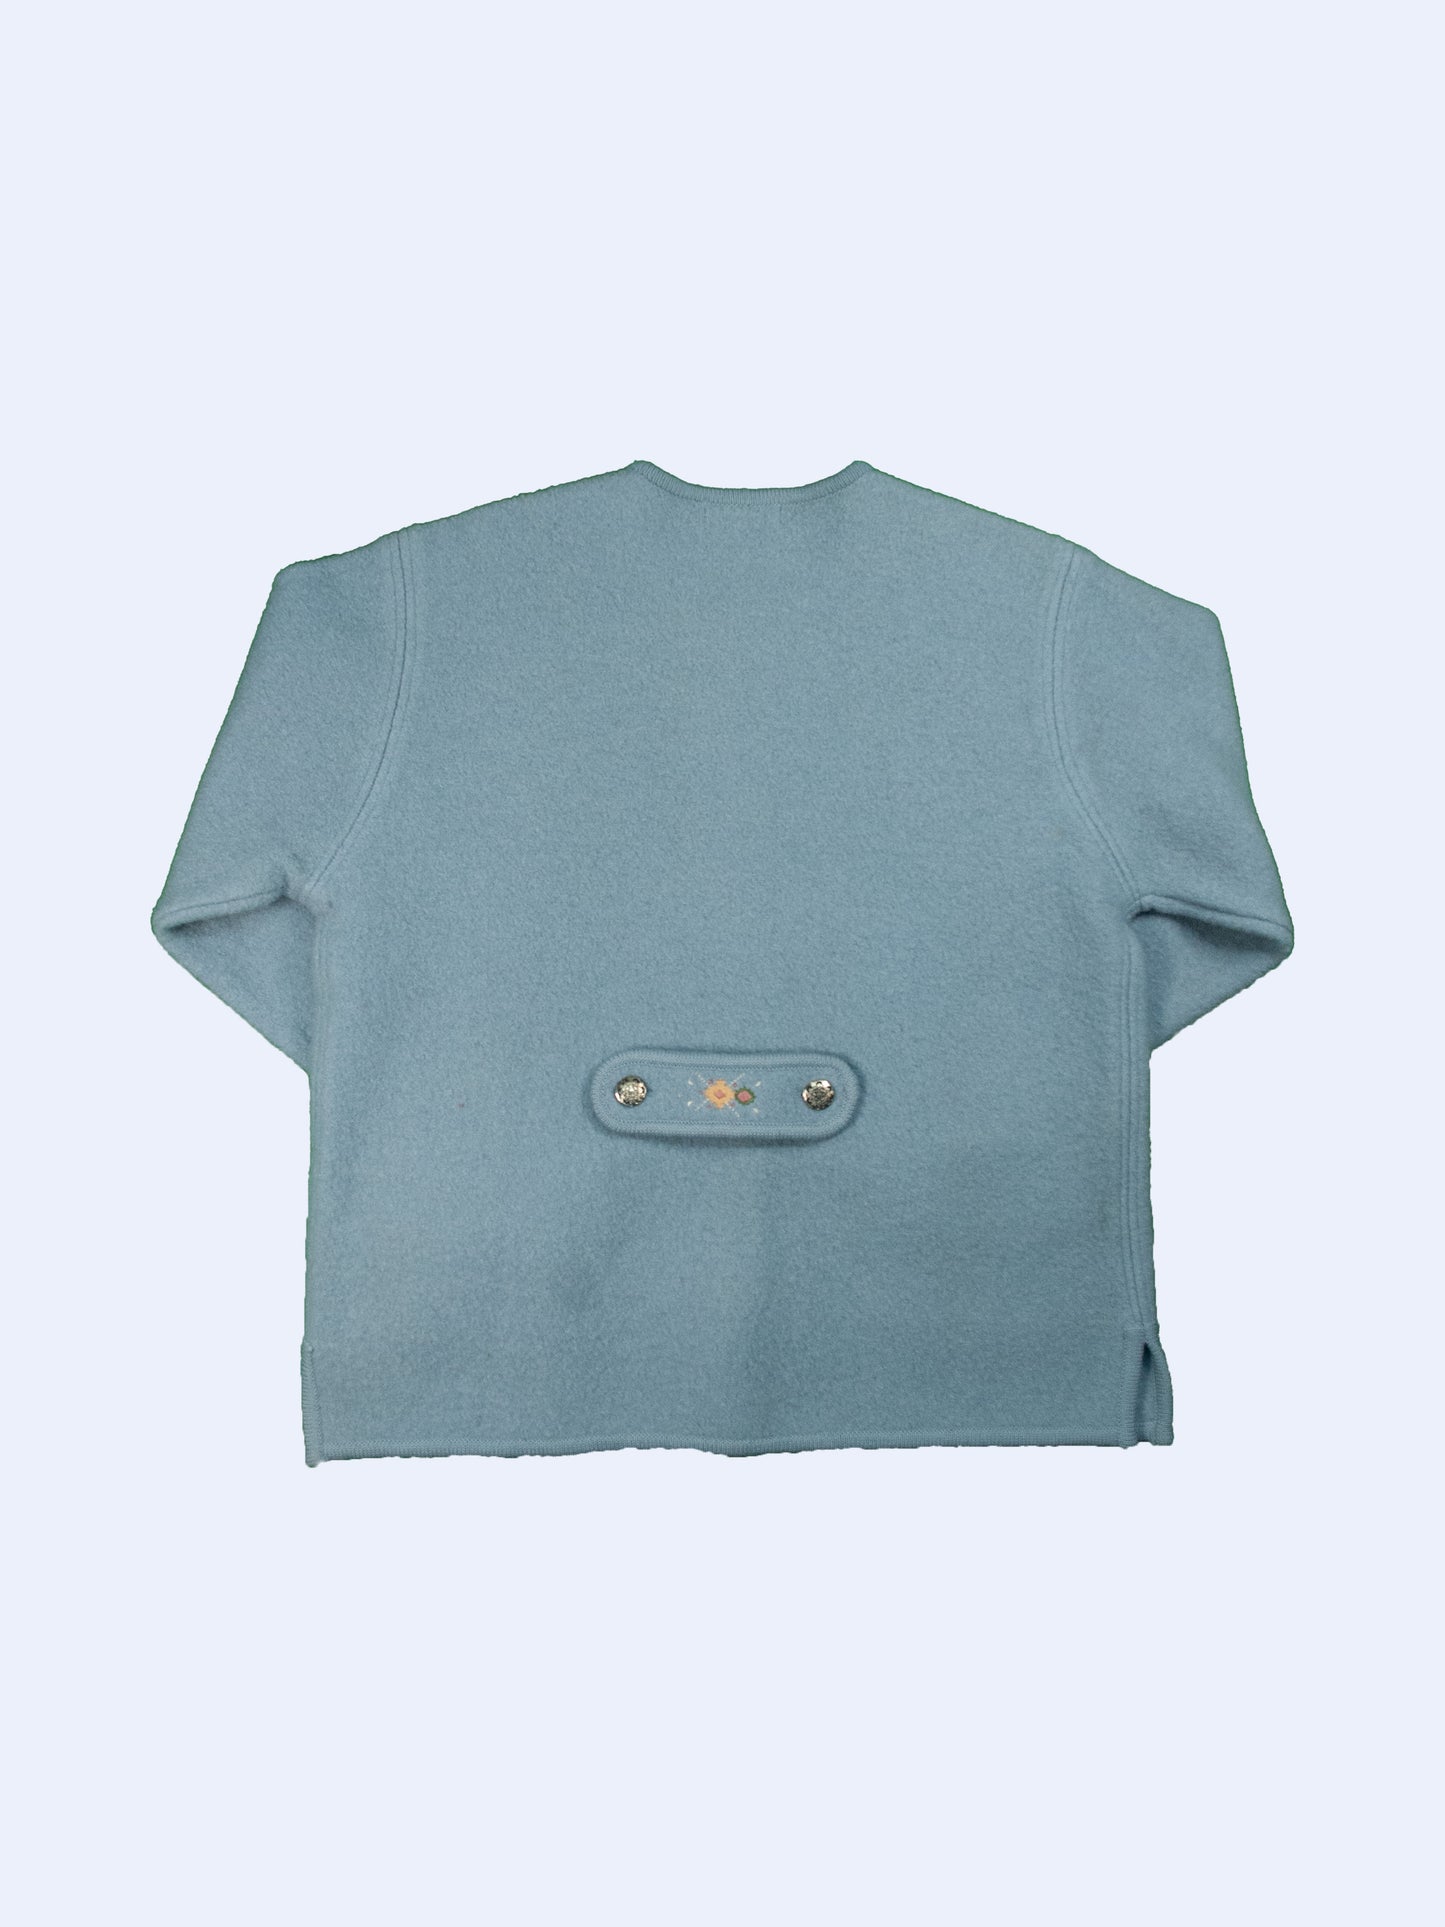 WOOLEN SWEATER TEMPO REAL LIGHT BLUE (L)